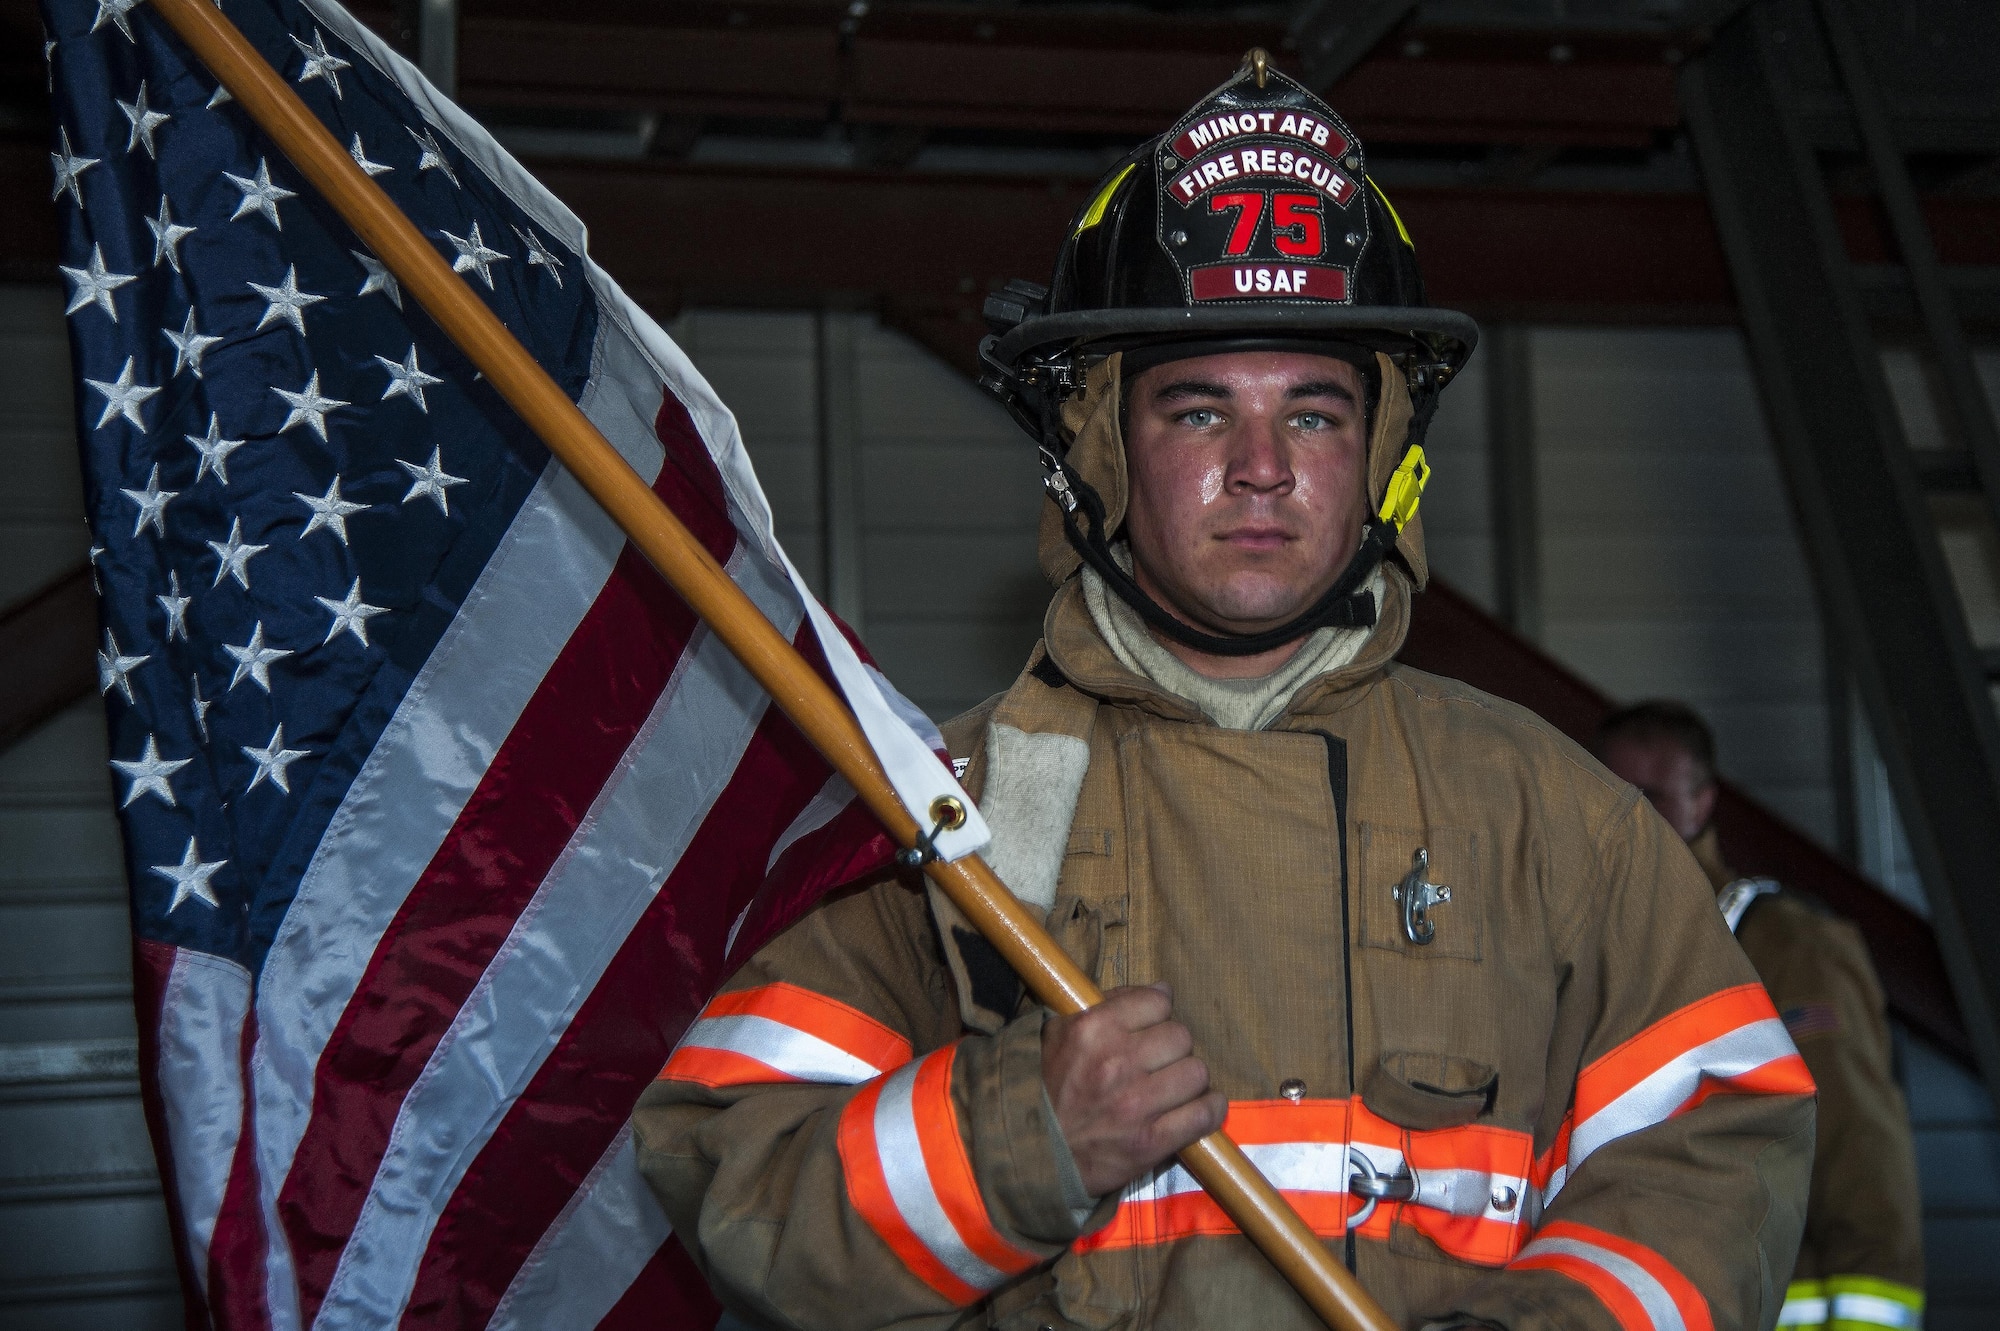 Senior Airman Nickolas Torrez, 5th Civil Engineer Squadron firefighter, leads the way carrying the American flag at Minot Air Force Base, N.D., Sept. 11, 2016. Torrez received this flag while deployed to an undisclosed location from an F-16 pilot that carried out anti-terrorism missions. (U.S. Air Force photo/Airman 1st Class Christian Sullivan)